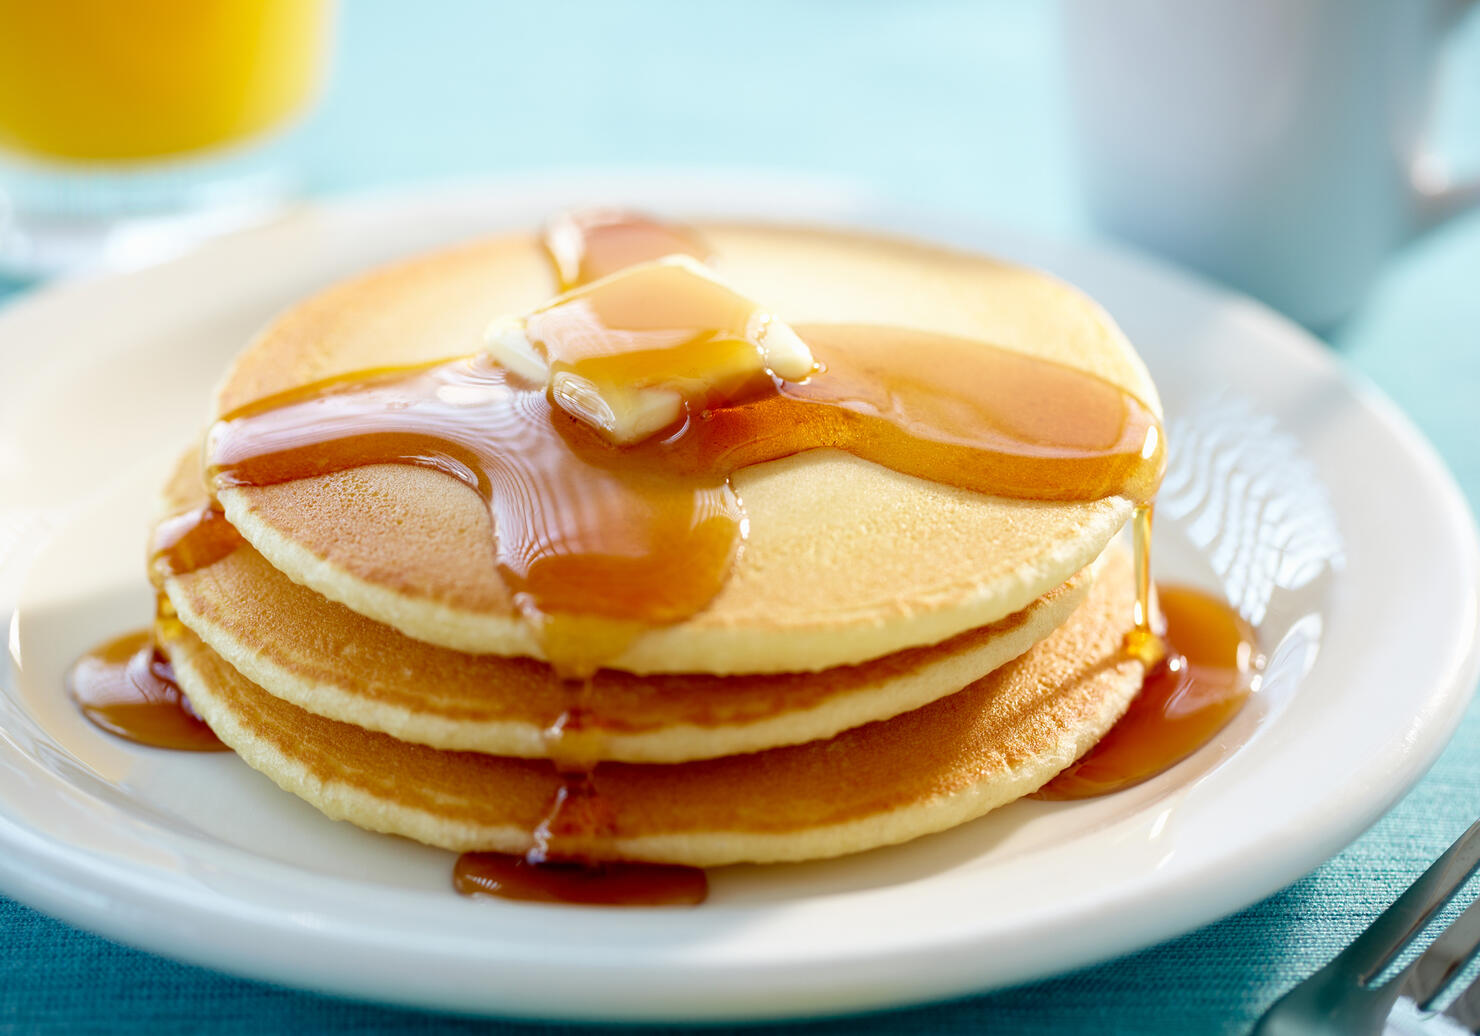 Pancakes with butter and syrup